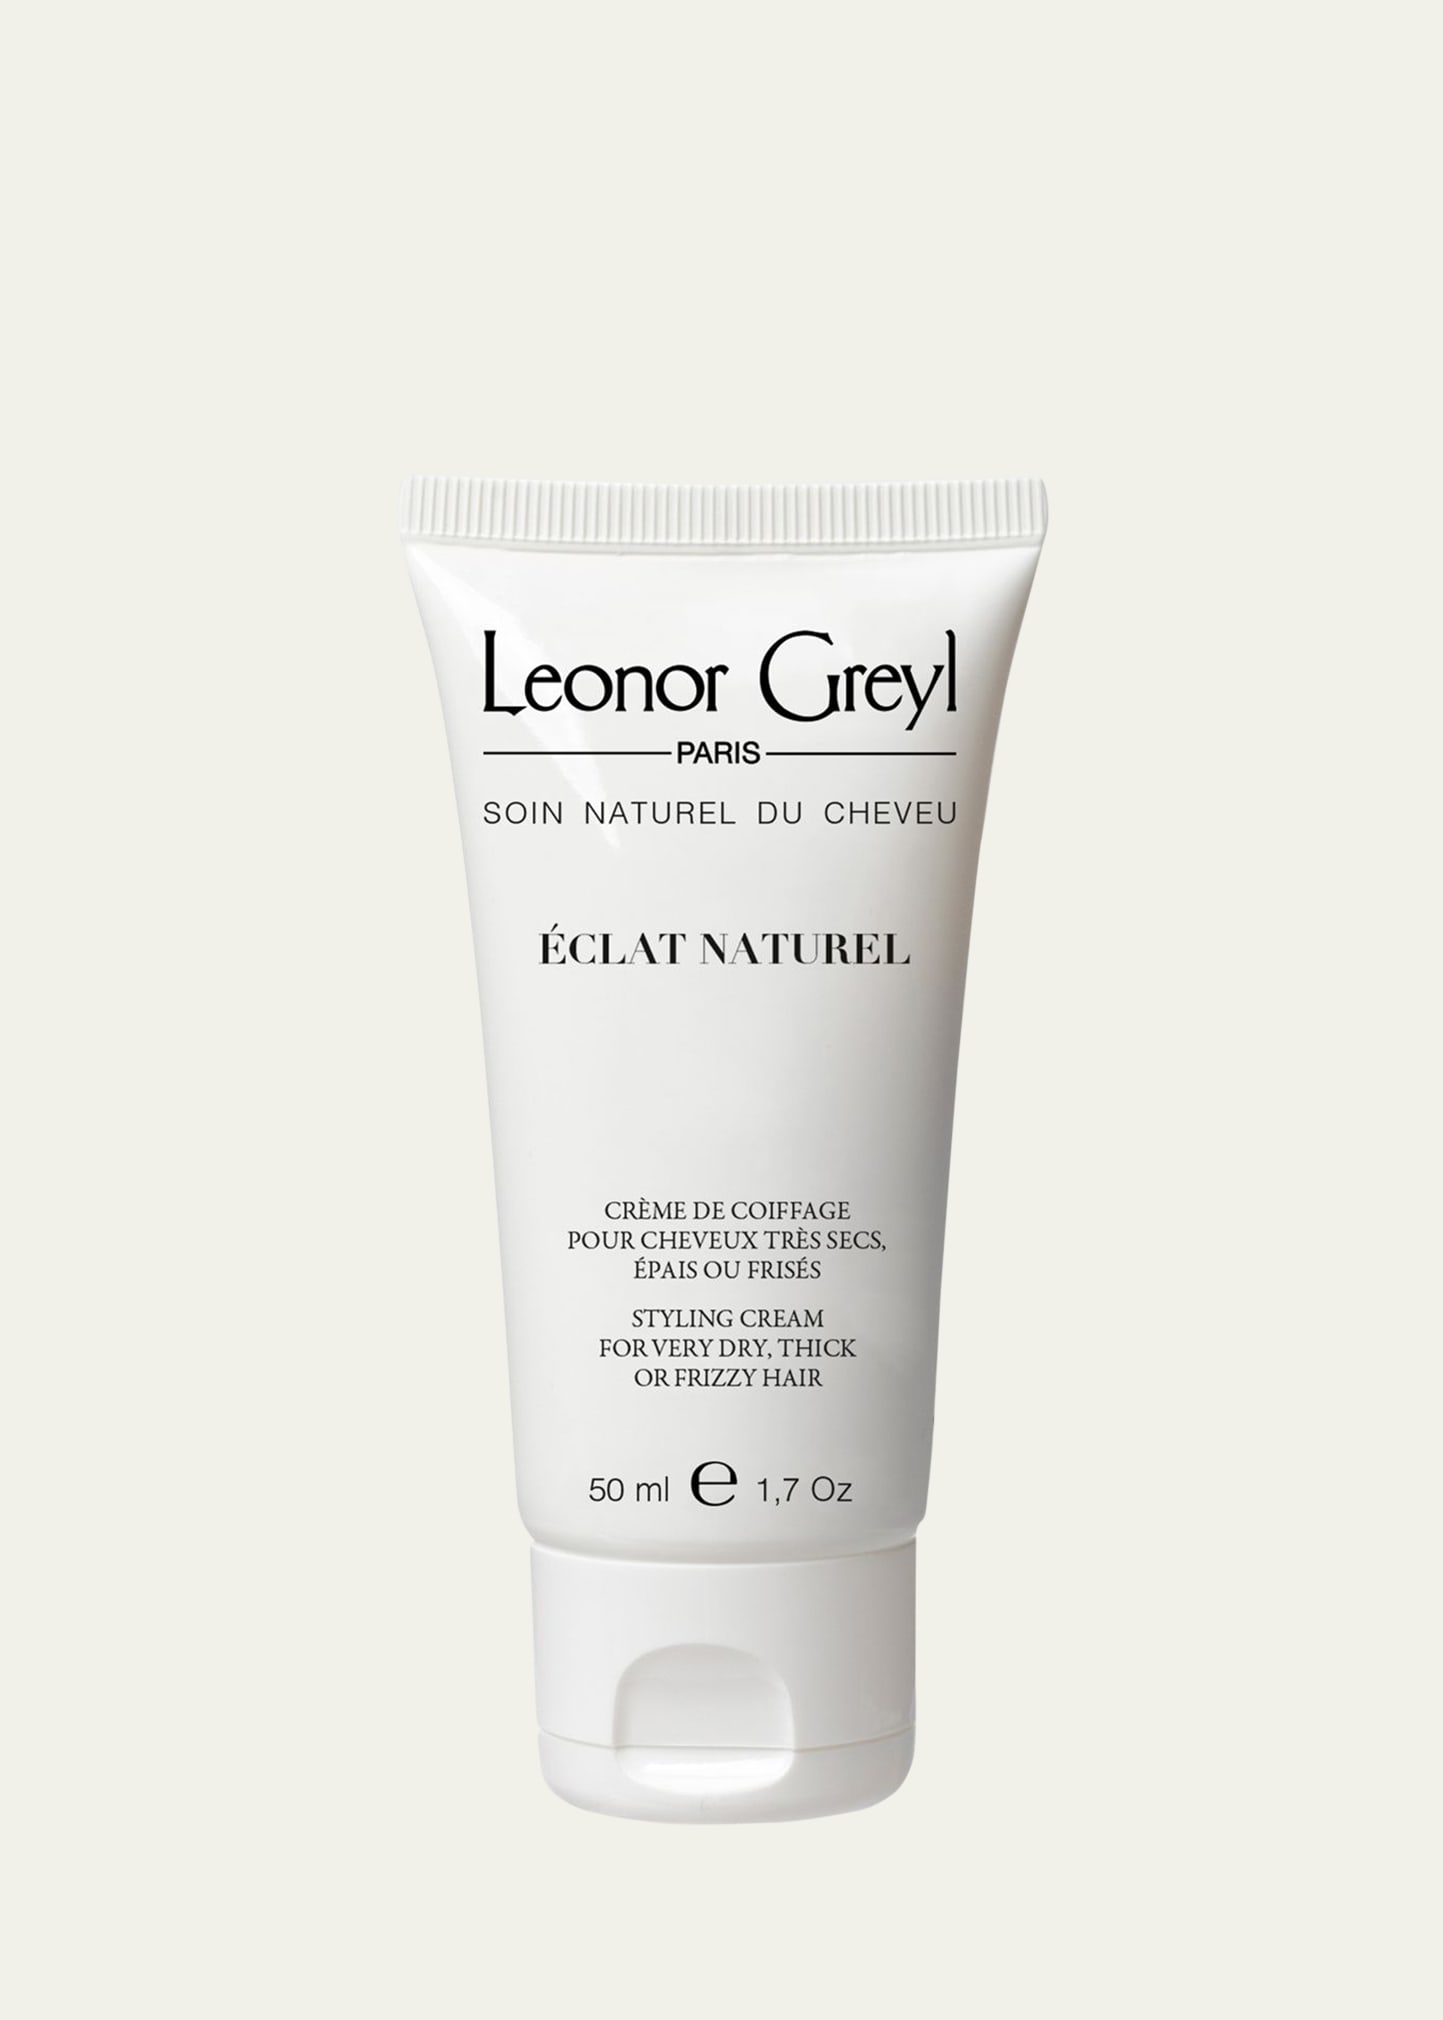 Éclat Naturel (Styling Cream for Very Dry, Thick, or Frizzy Hair), 1.7 oz./ 50 mL